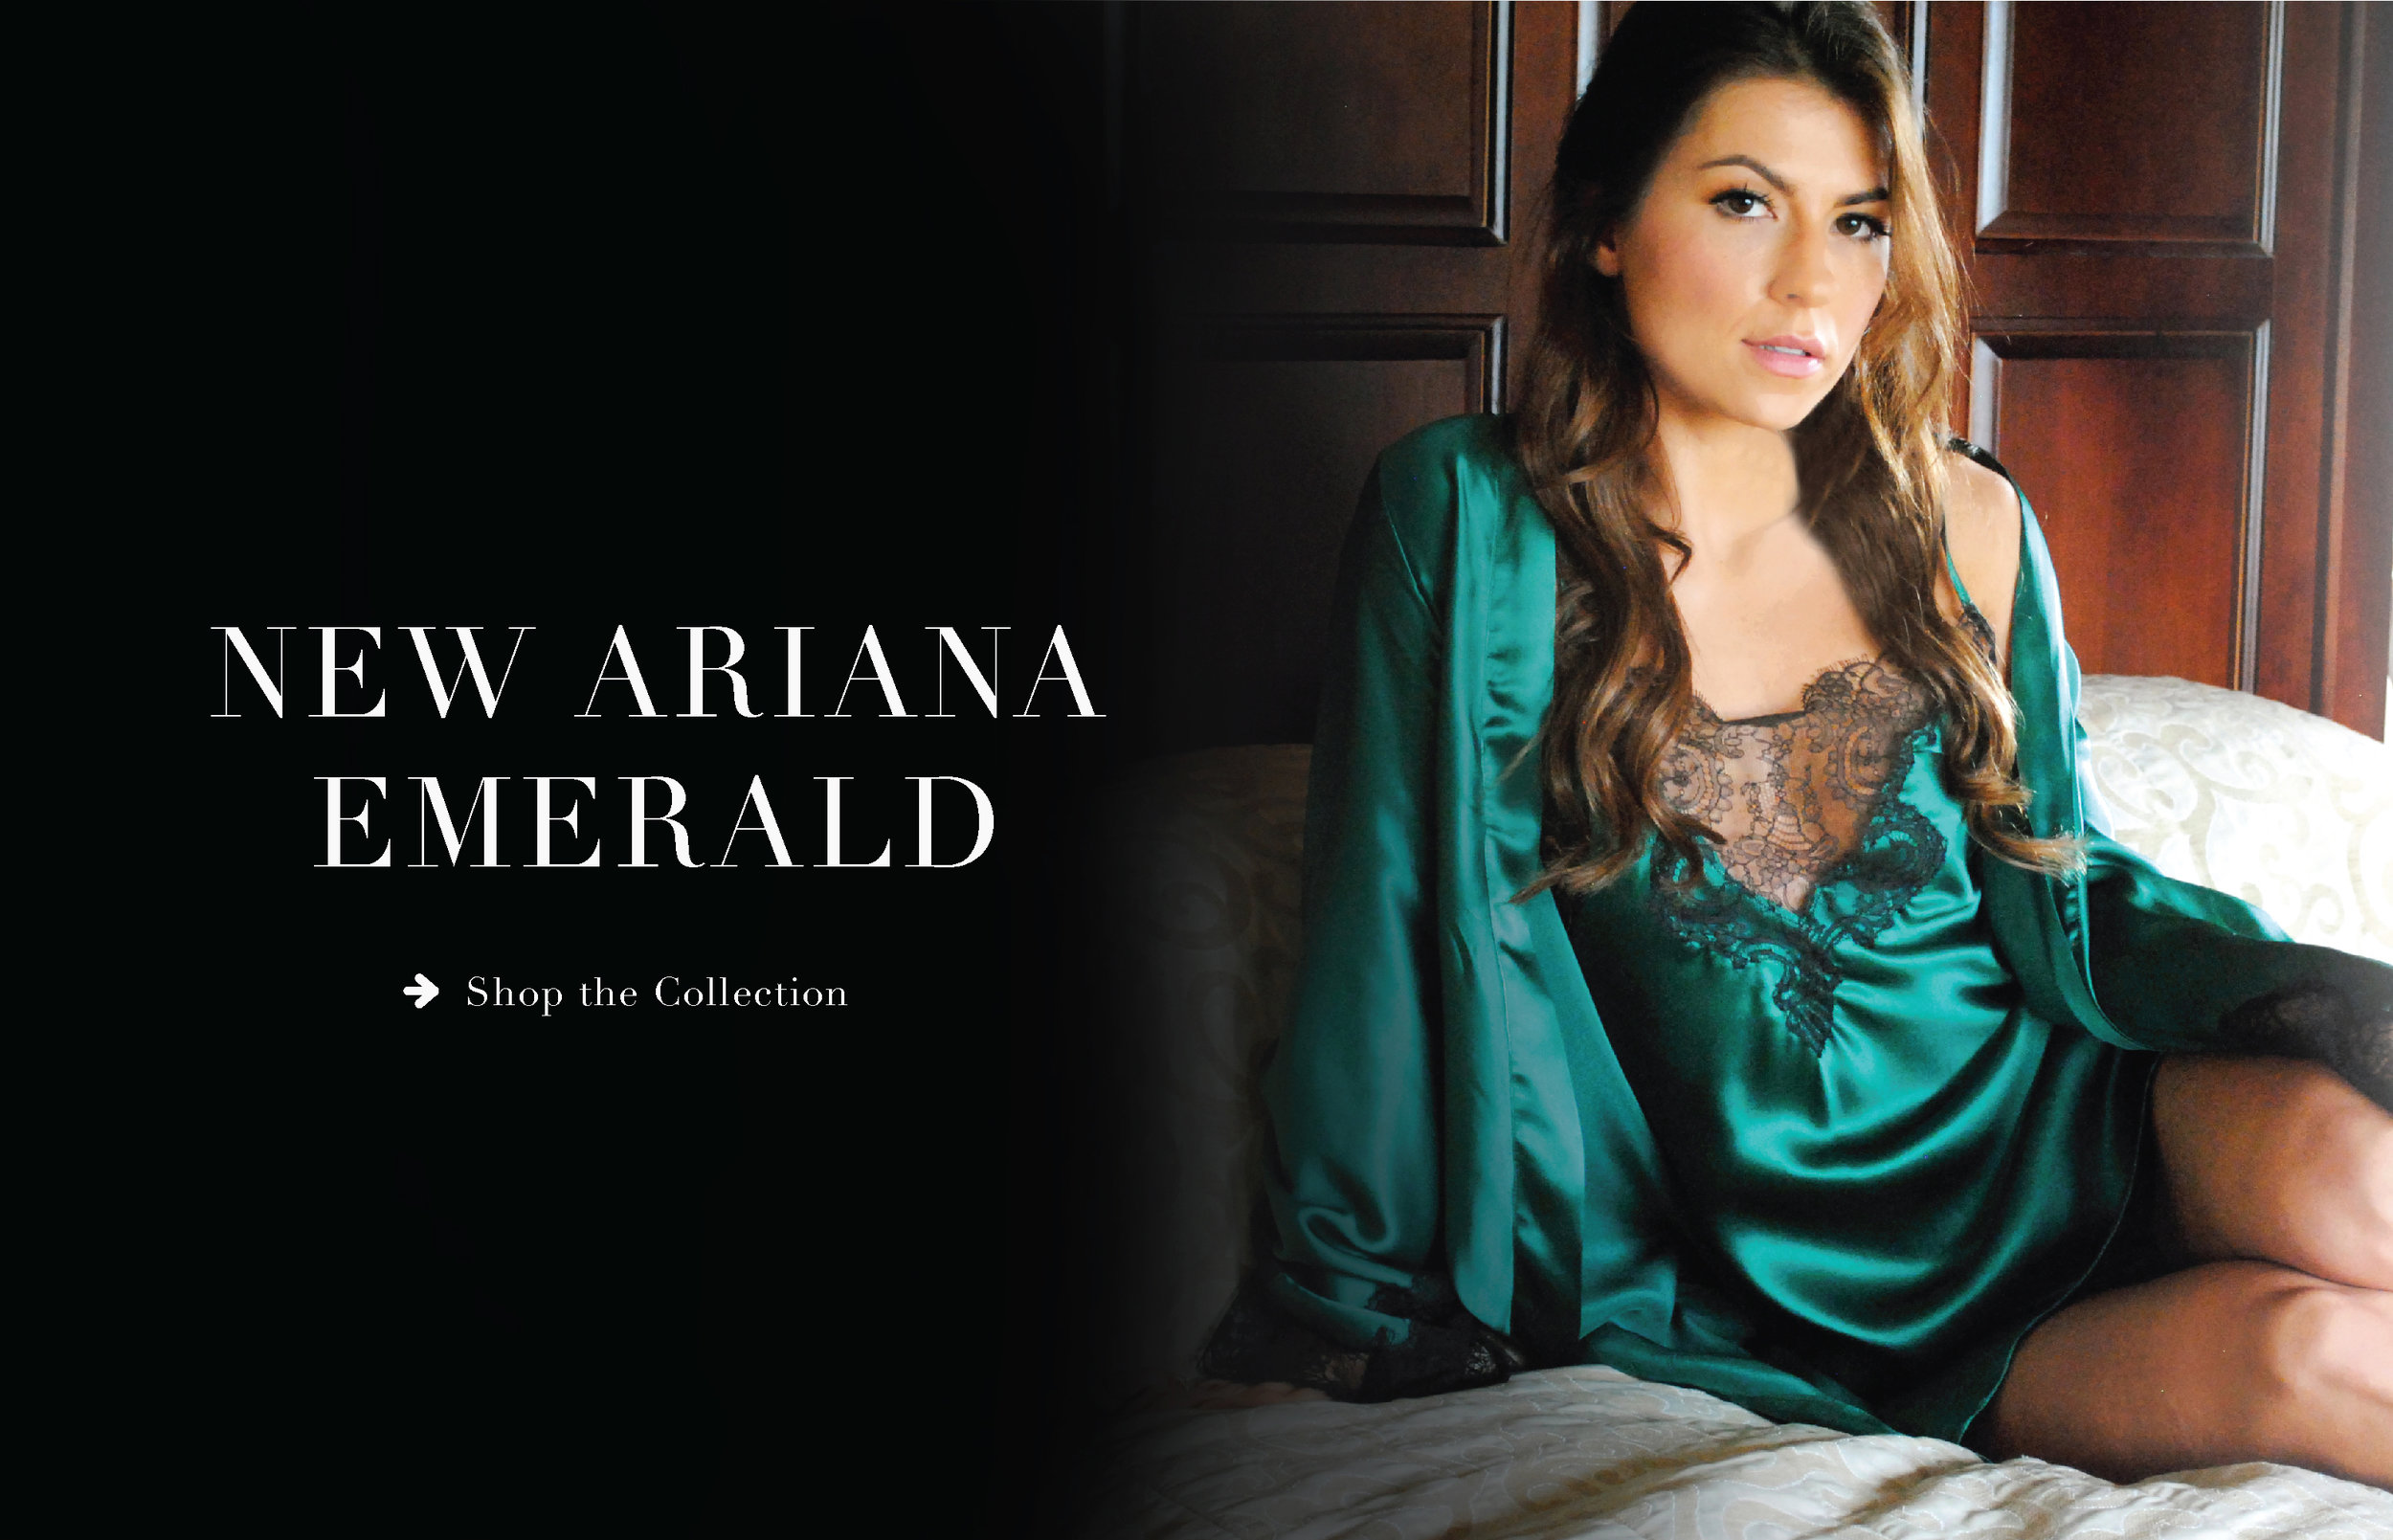 ARIANA EMERALD A/W18 COLLECTION